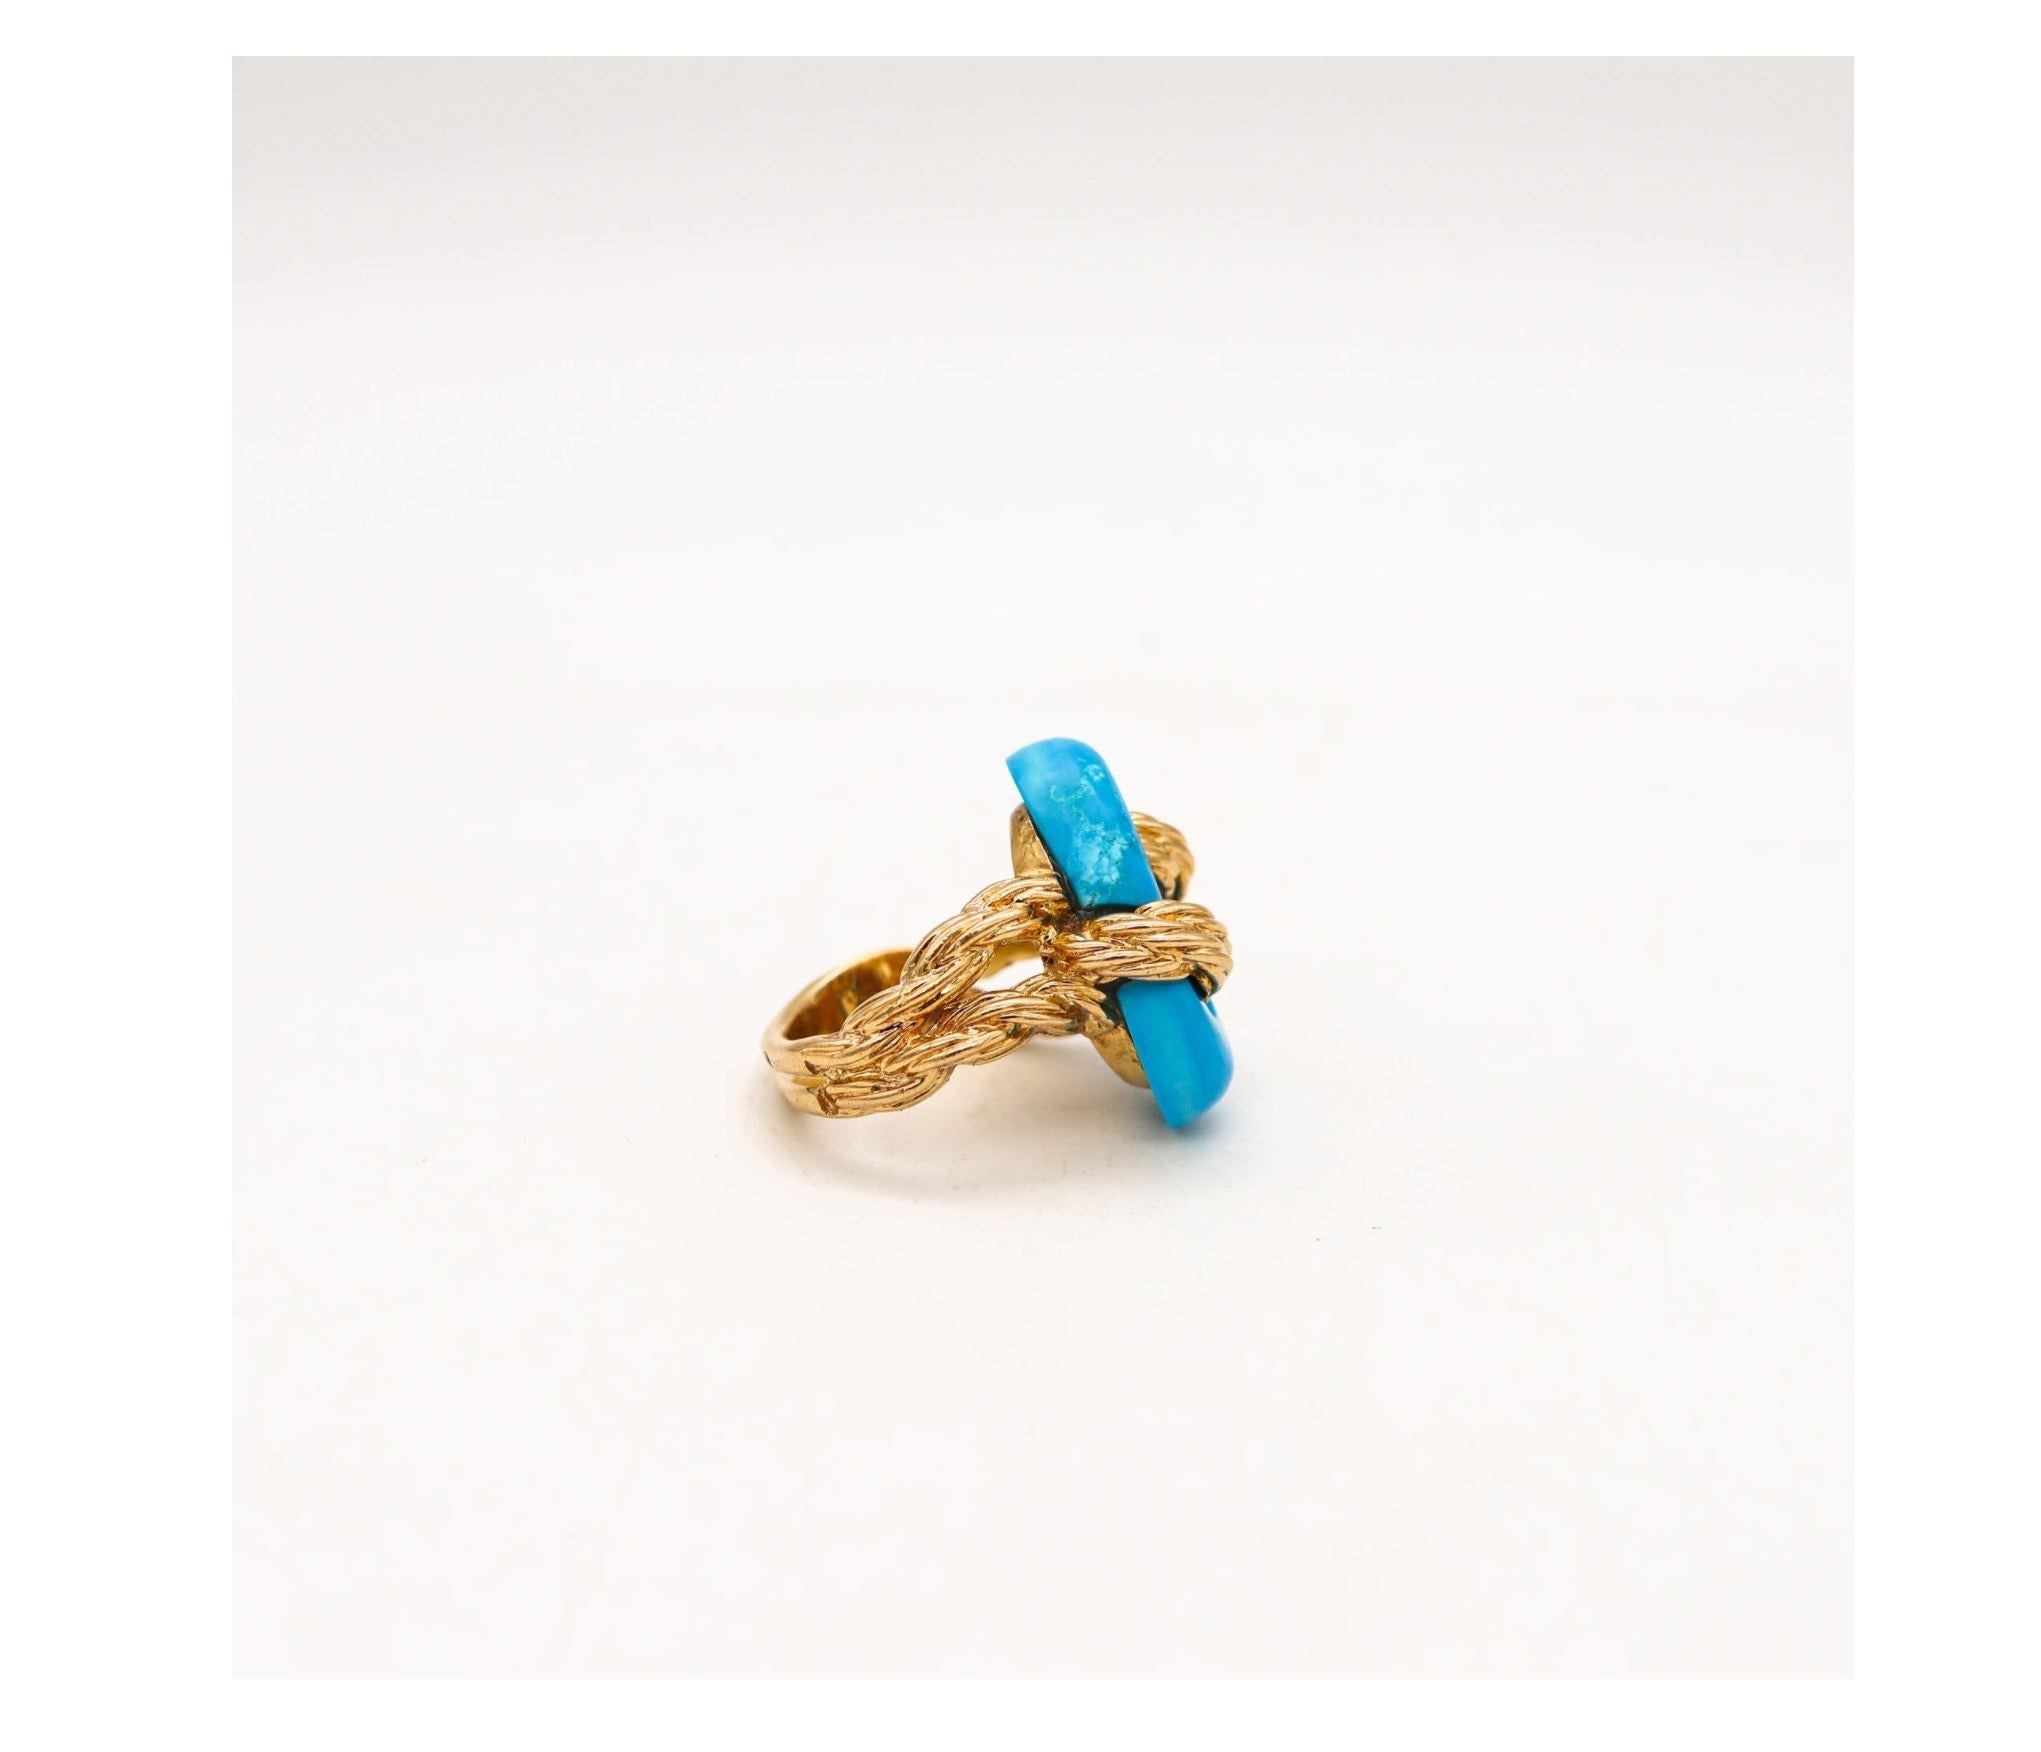 Mixed Cut Van Cleef & Arpels 1970 Paris Twisted Ropes Cocktail Ring 18kt Gold Turquoise